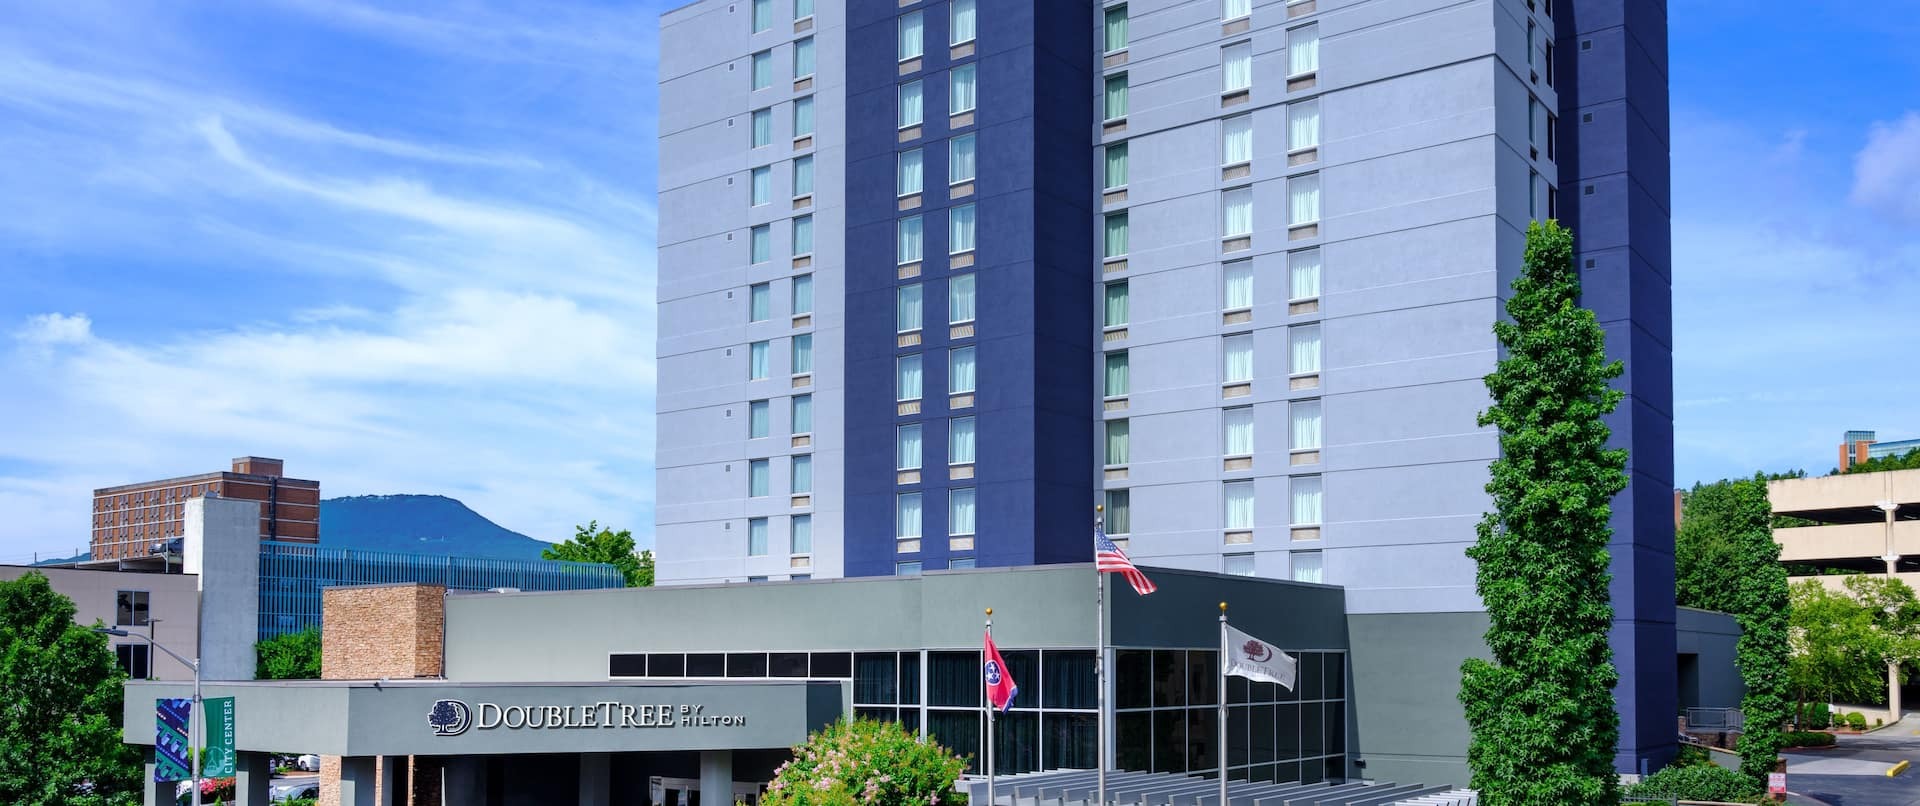 Photo of DoubleTree by Hilton Hotel Chattanooga Downtown, Chattanooga, TN